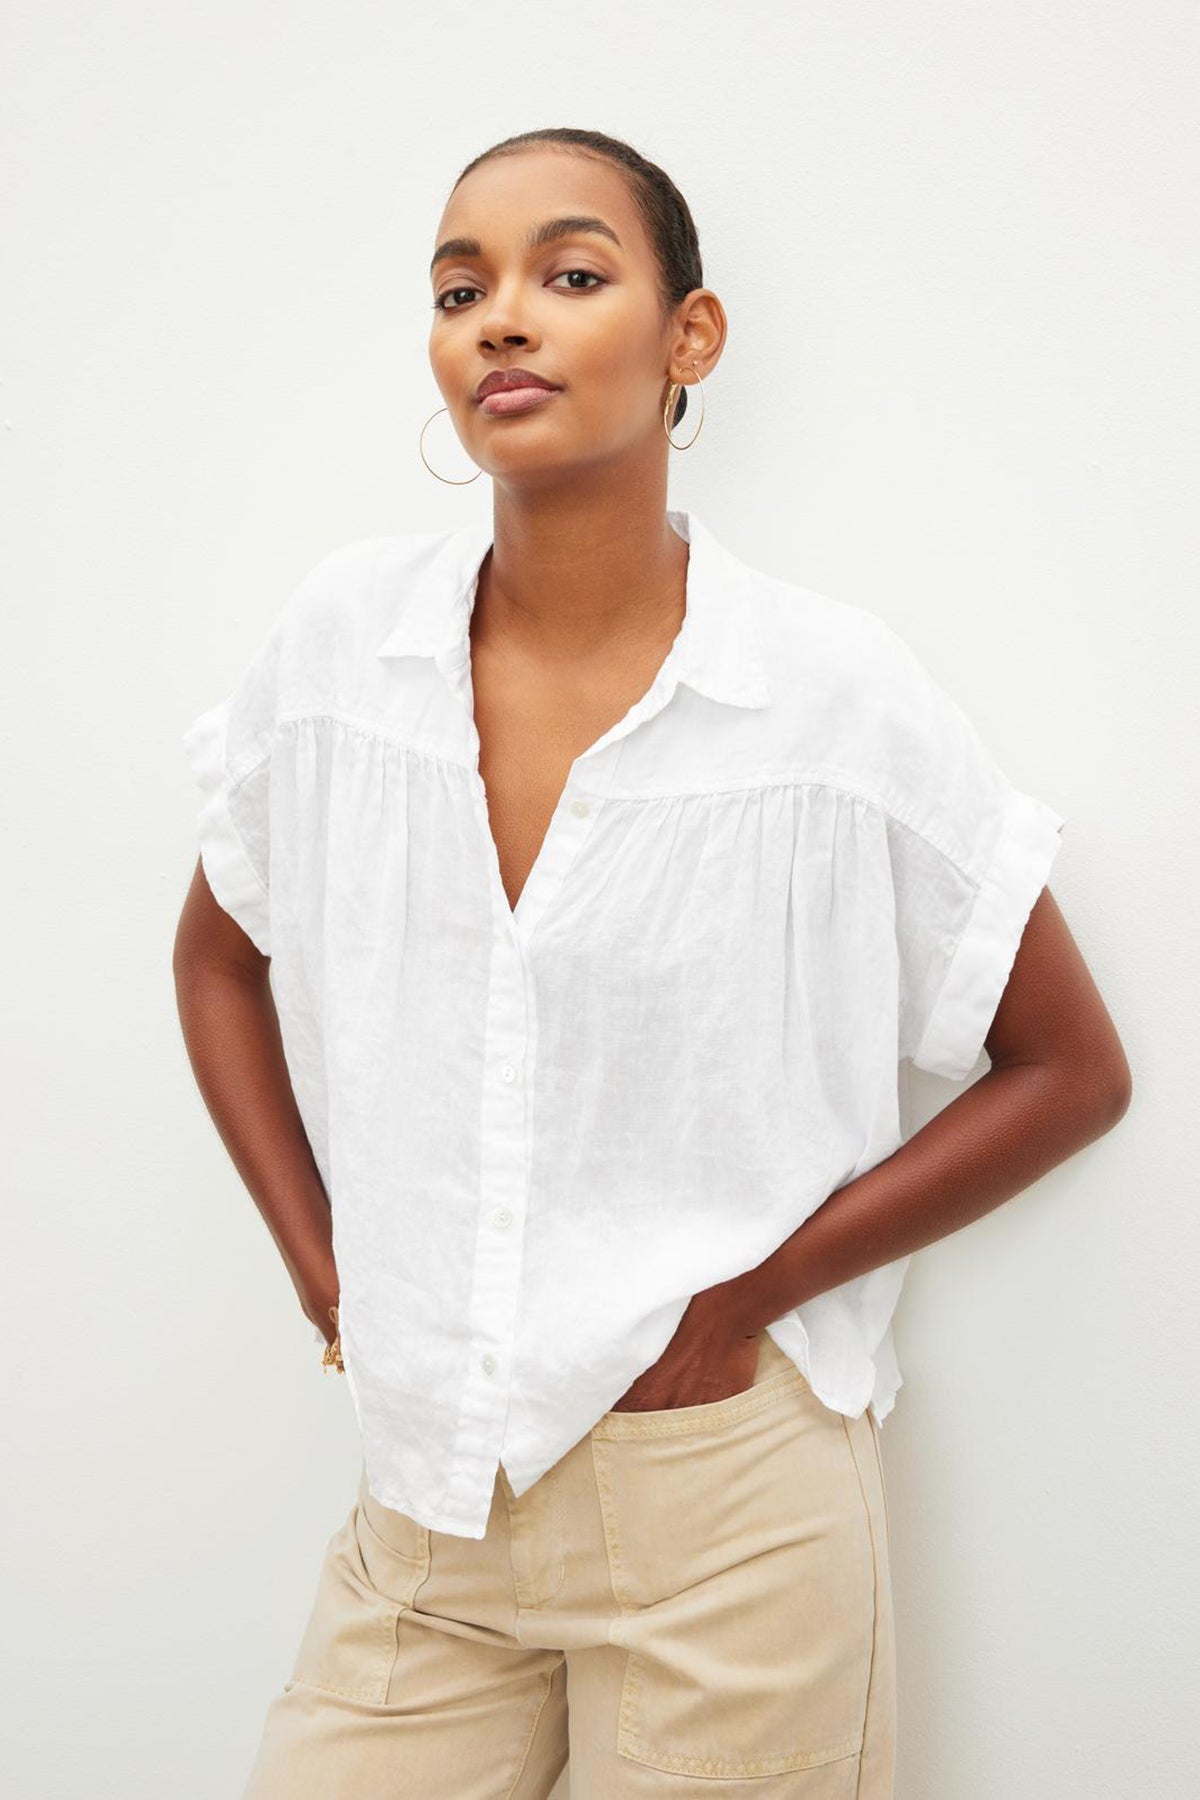   A confident woman posing in a Velvet by Graham & Spencer ARIA LINEN BUTTON FRONT TOP and beige pants against a plain background. 